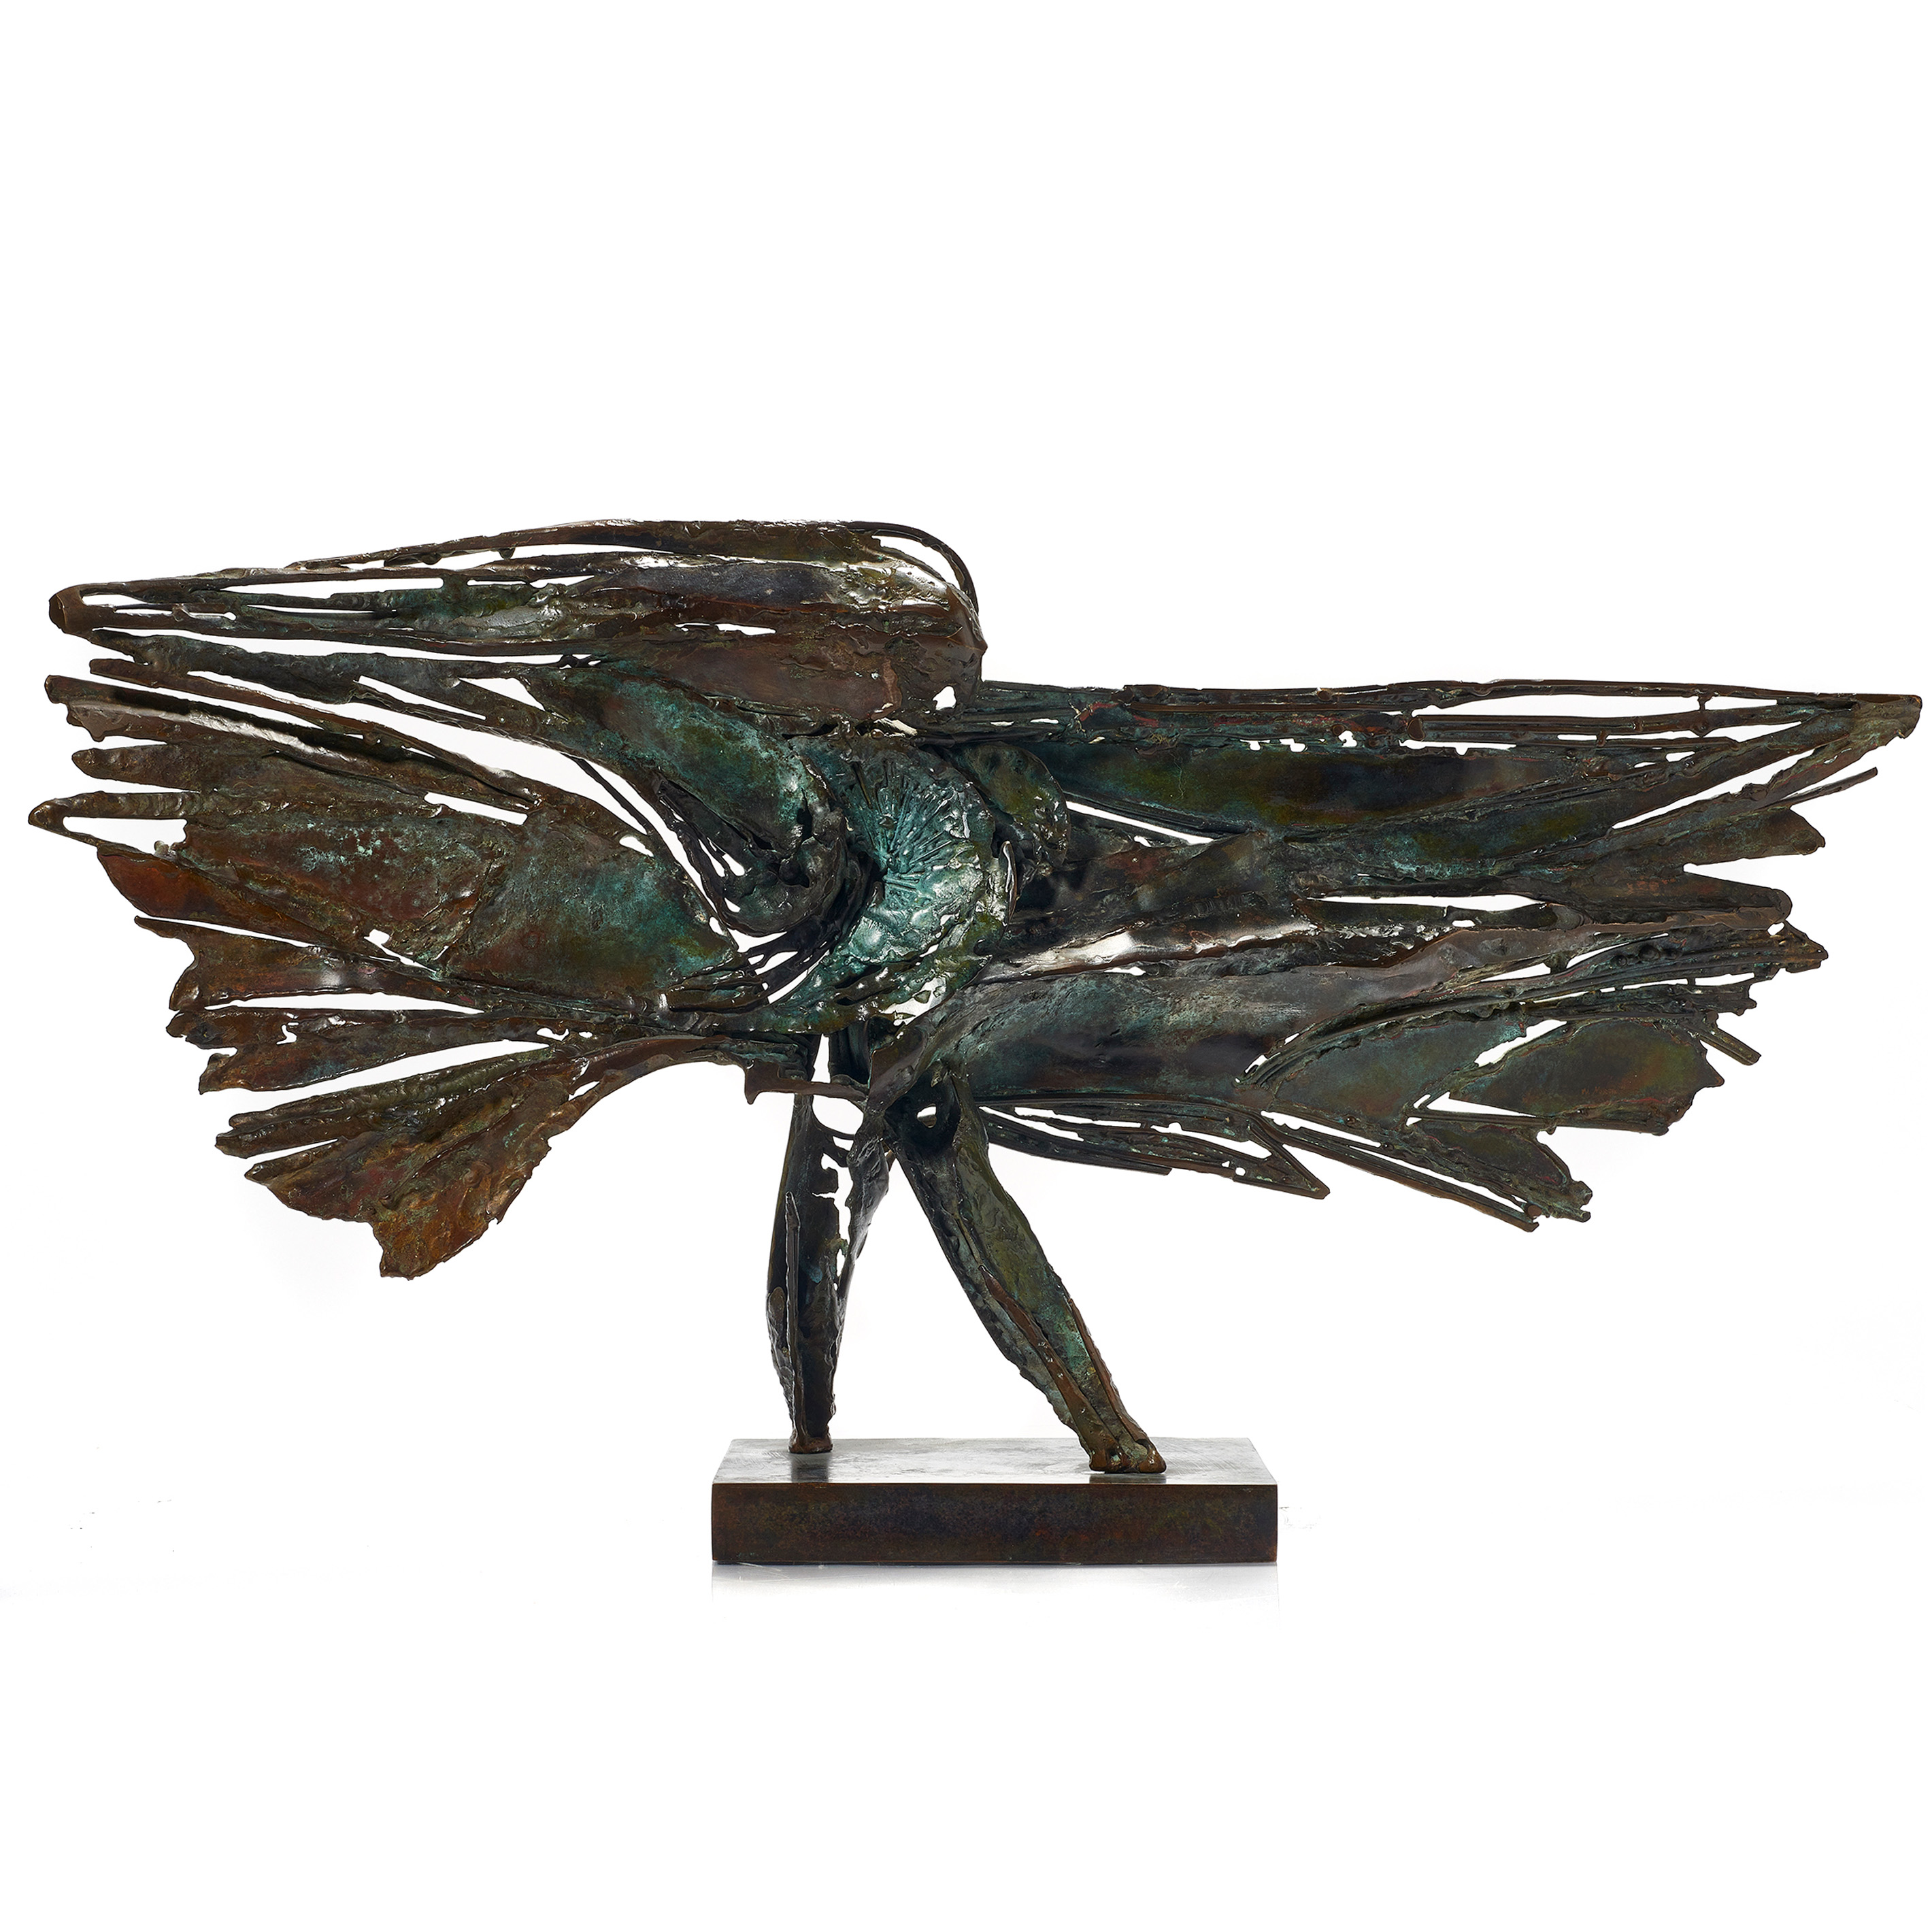 SCULPTURE ABSTRACT WINGED FIGURE 3a2eb2